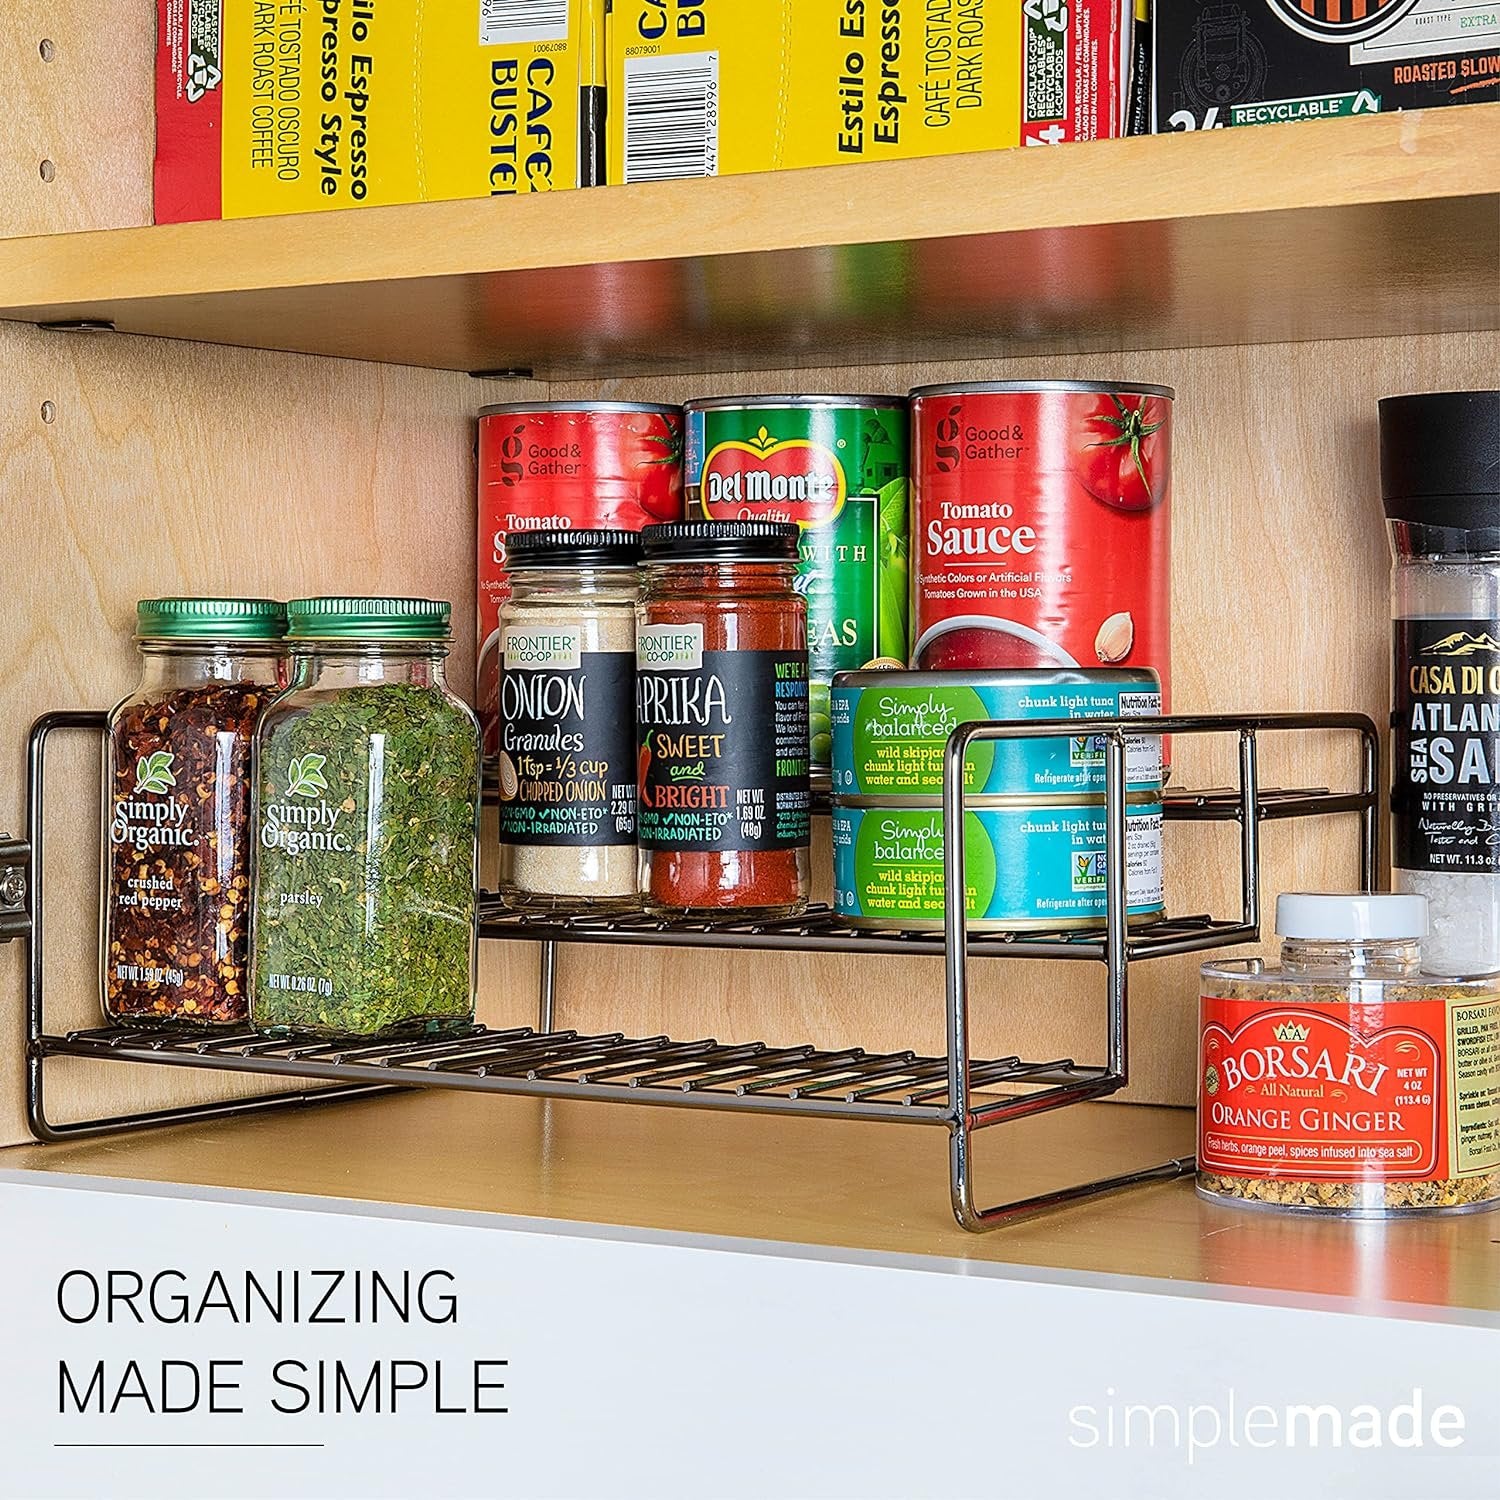 SIMPLEMADE SPICE RACK